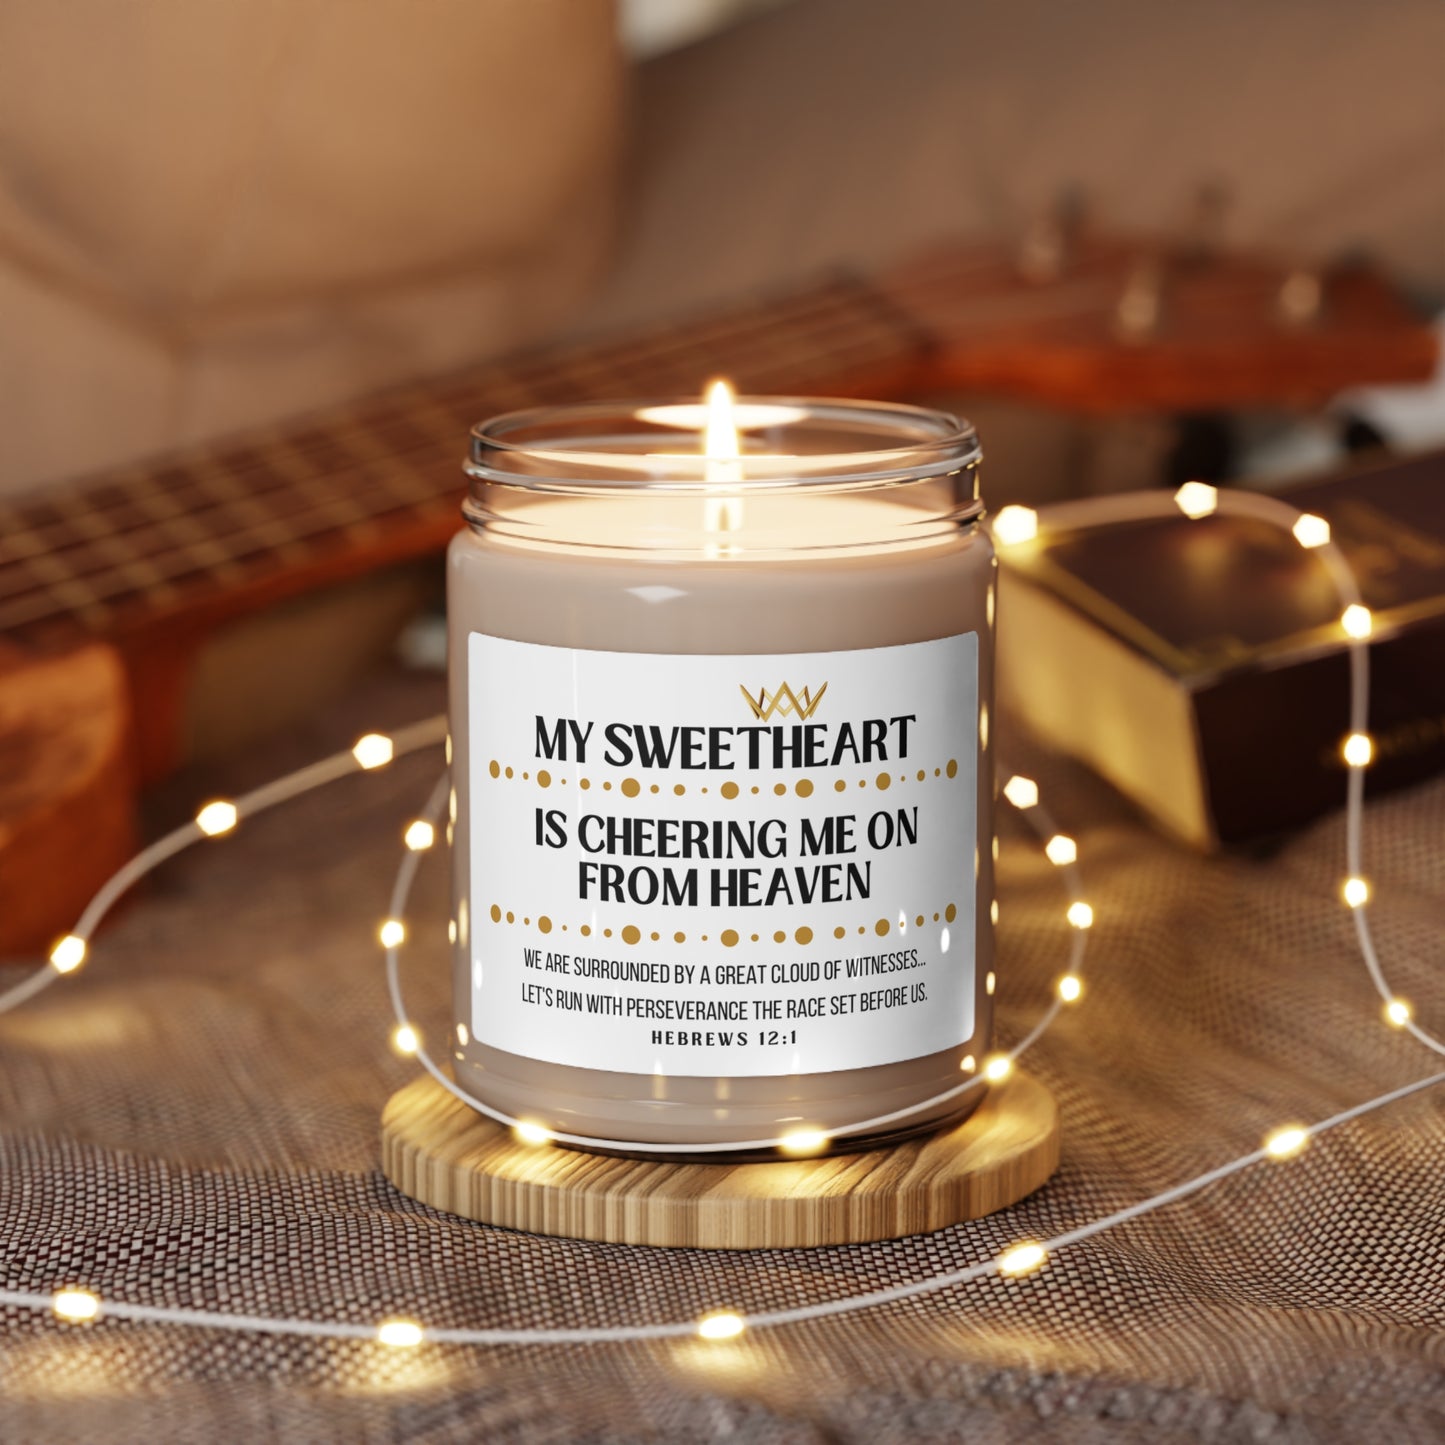 My Sweetheart Memorial Scented Soy Candle, Cheering Me On From Heaven